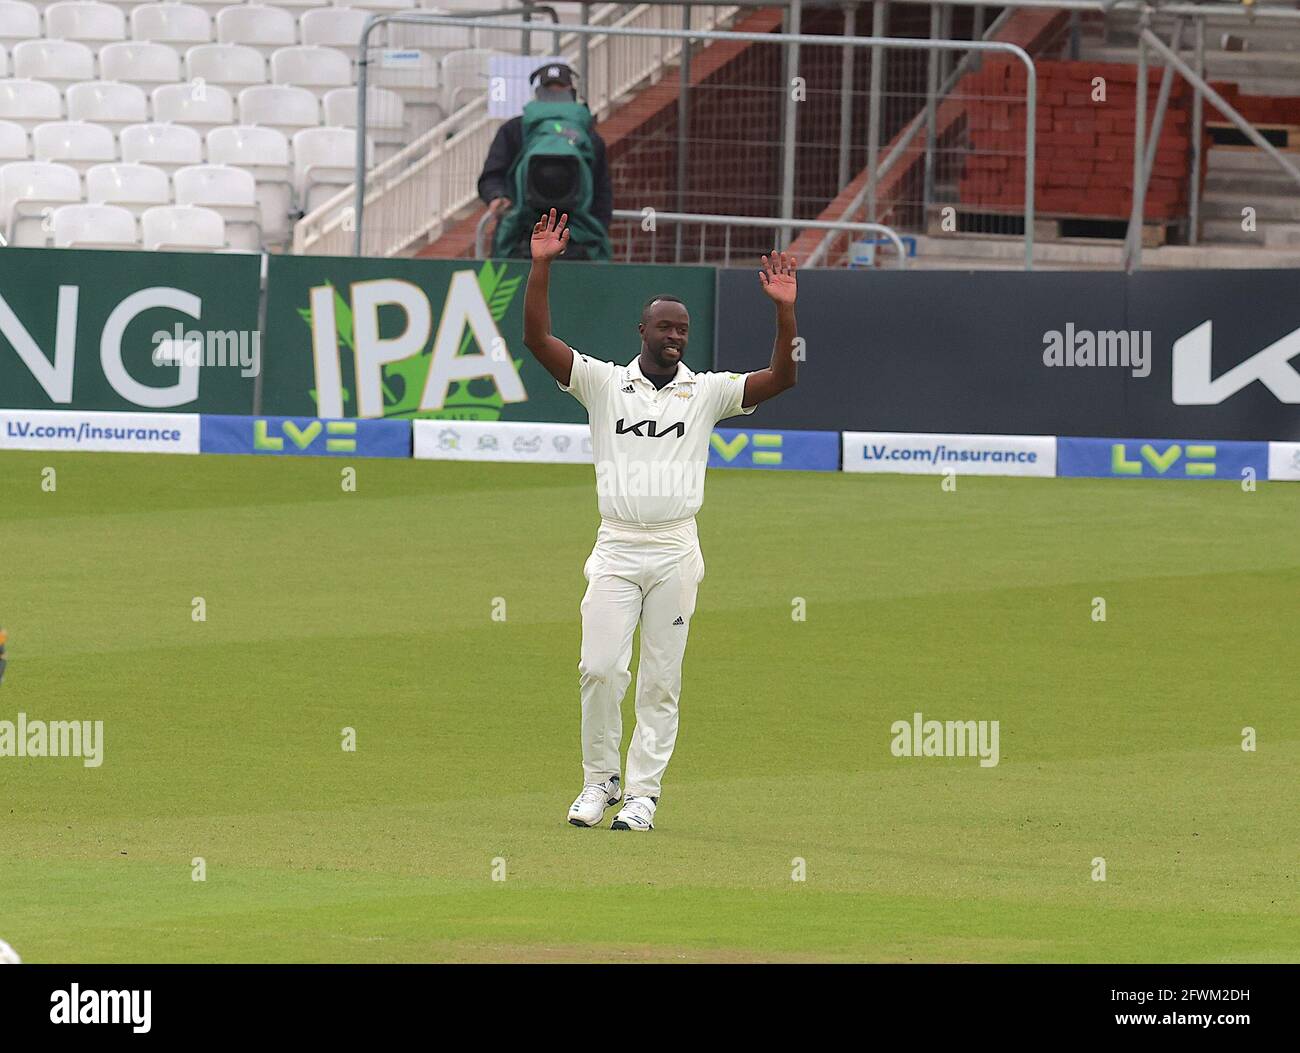 London, UK. 23 May, 2021. London, UK. Surrey’s Kemar Roach acknowledges the applause as Surrey take on Middlesex in  the County Championship at the Kia Oval, day four. David Rowe/Alamy Live News Stock Photo